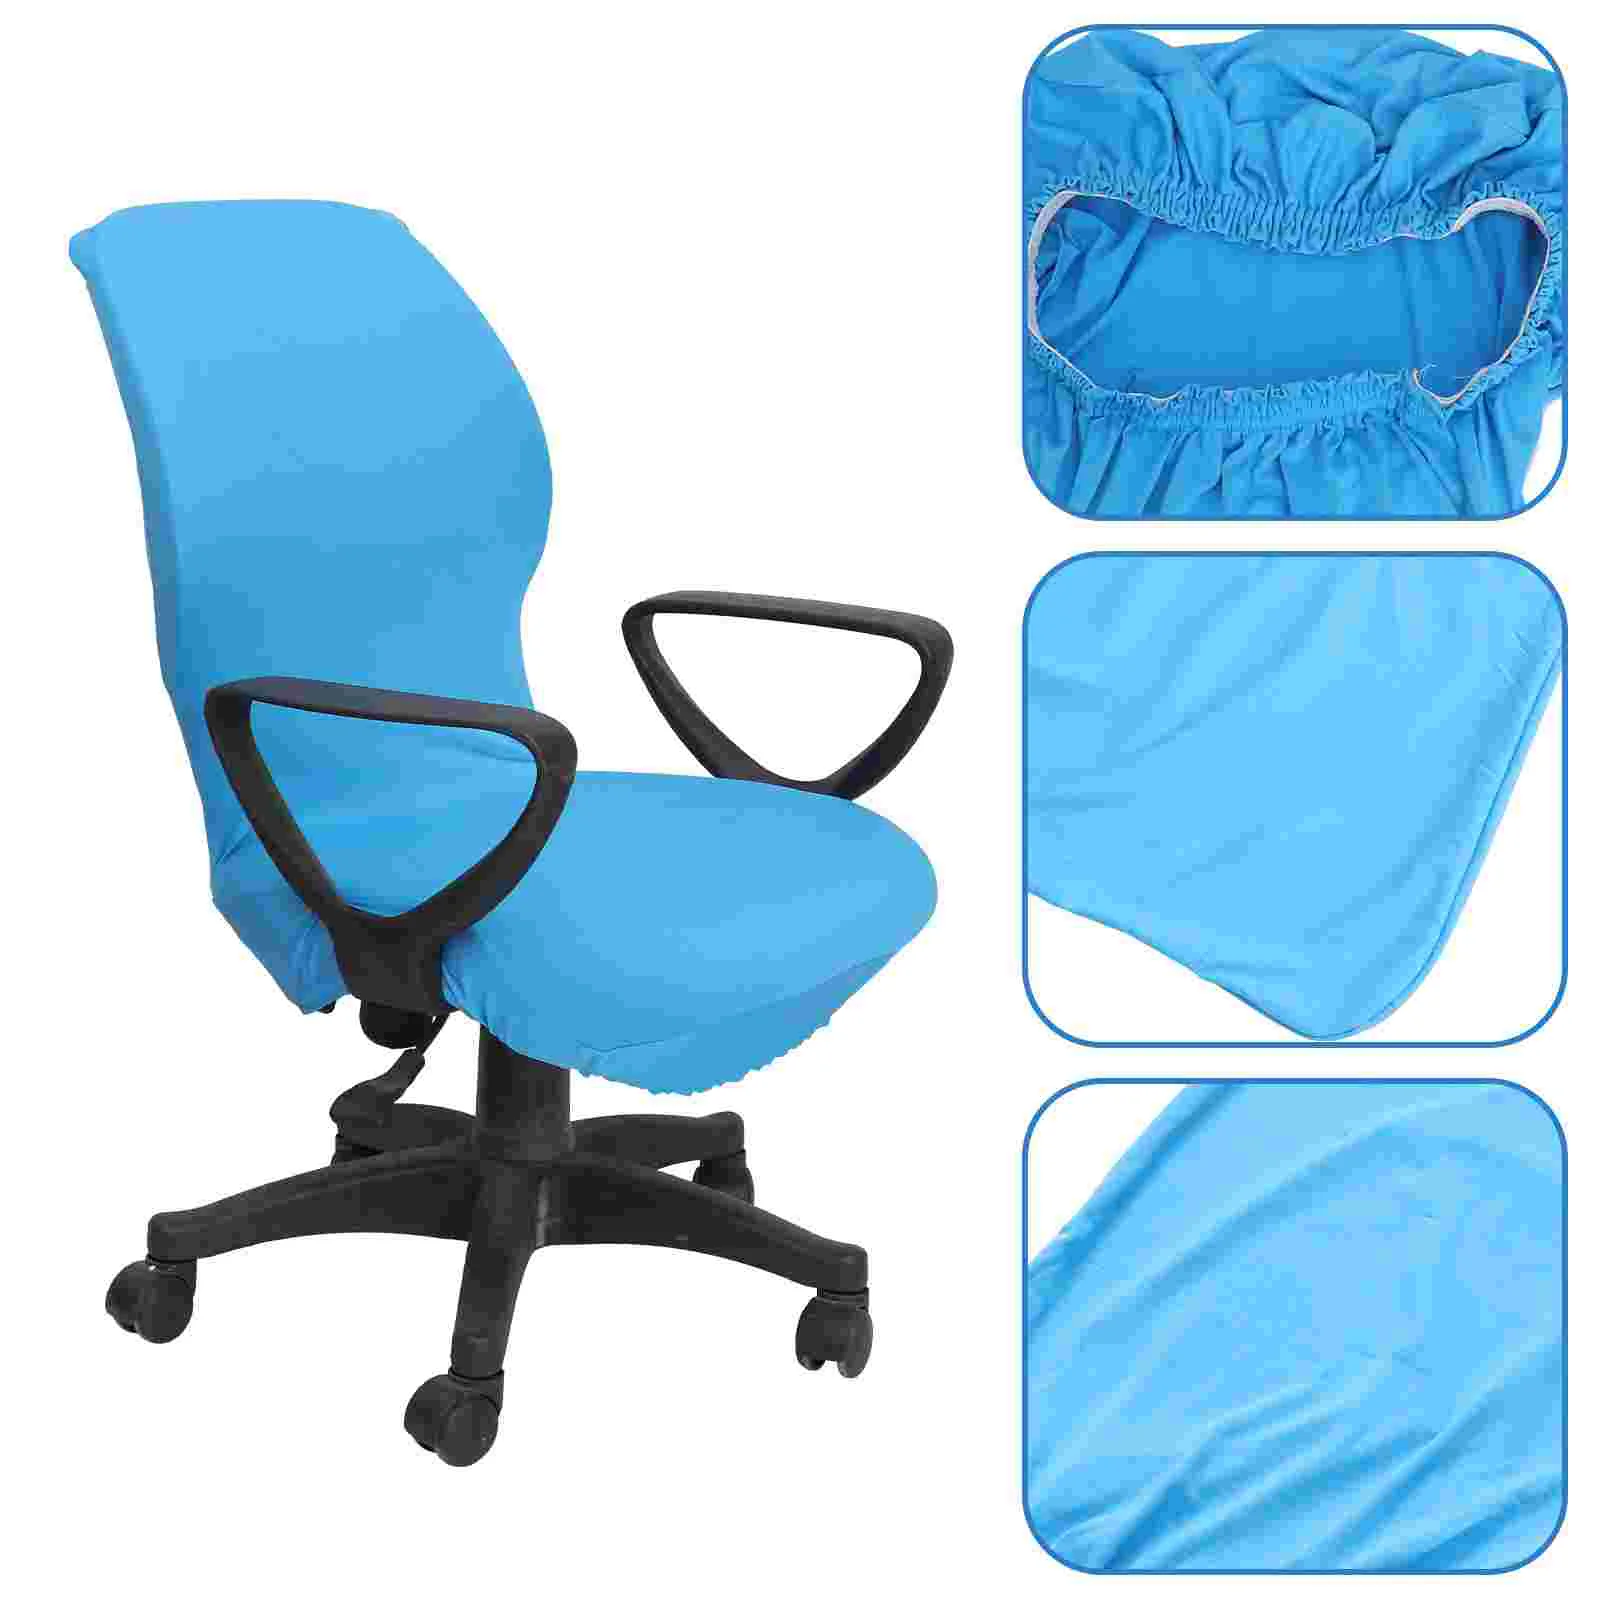 

Chair Covers Cover Office Computer Slipcover Desk Stretch Rotating Slipcovers Swivel Elastic Black Stretchy Universal Fabric